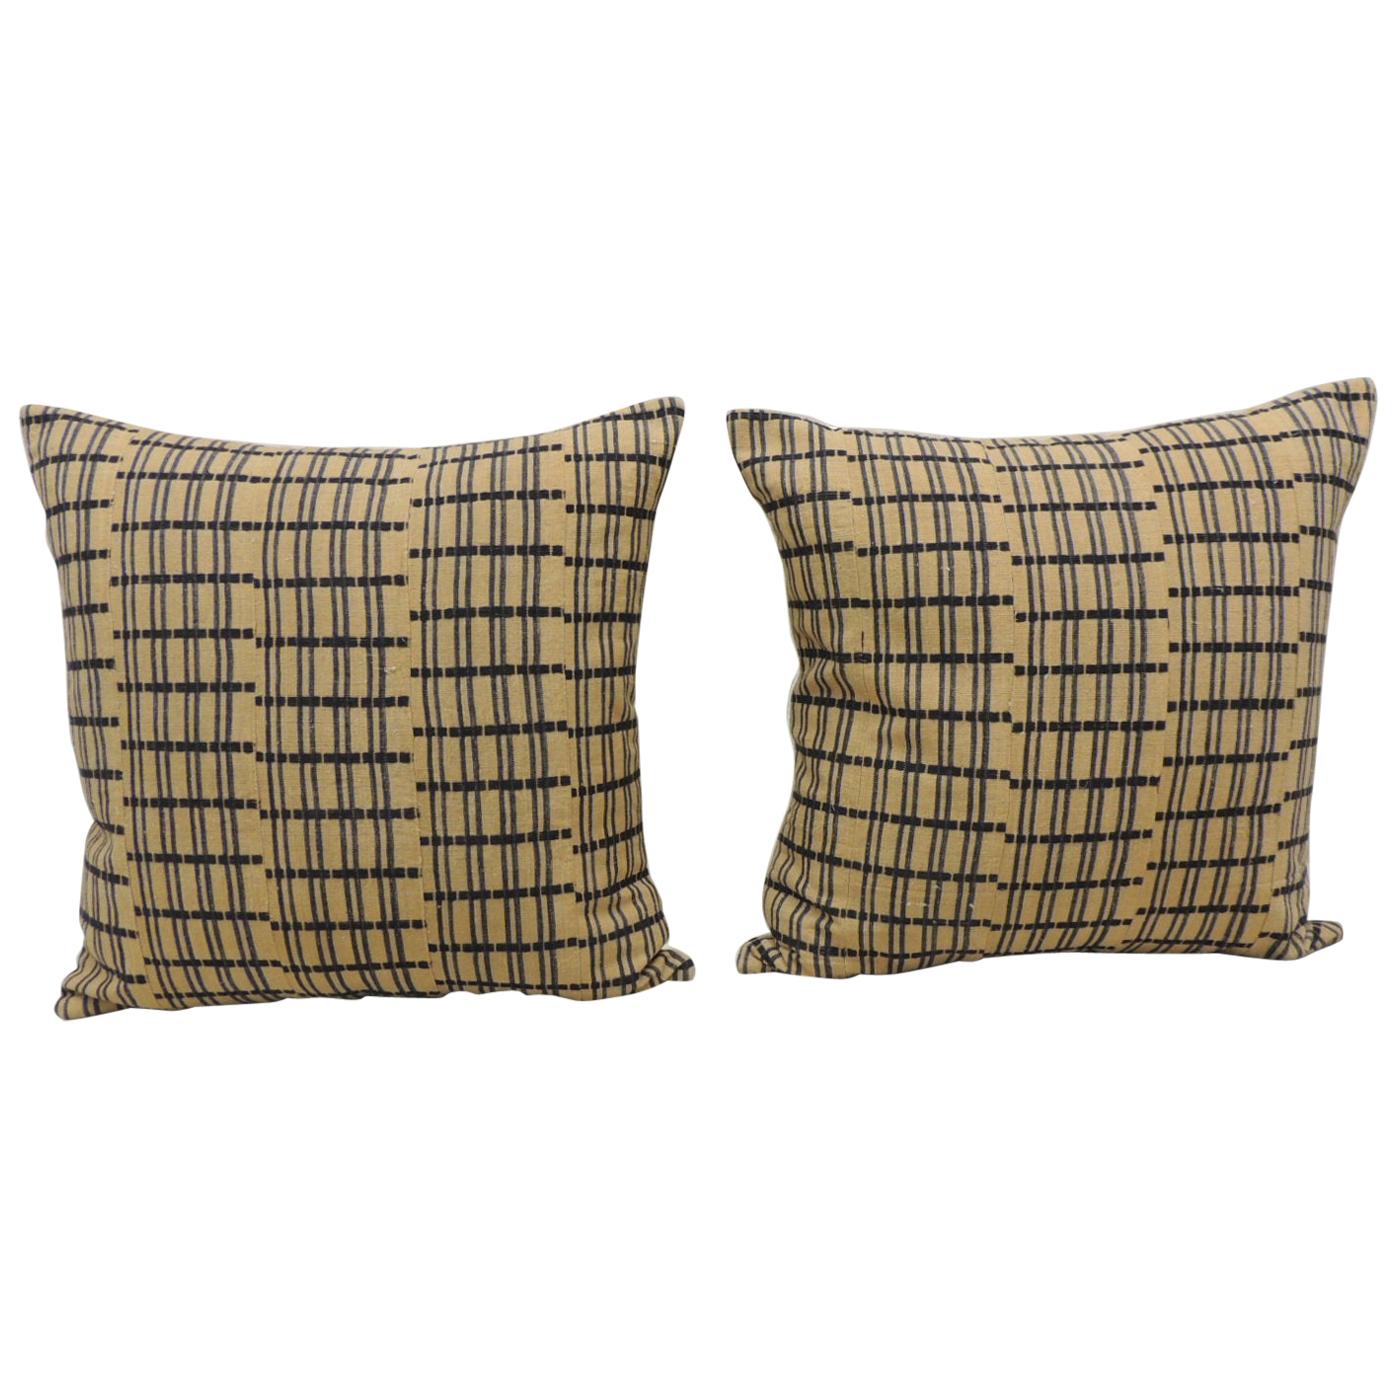 Vintage Pair of Yellow and Dark Blue African Stripweaves Decorative Pillows